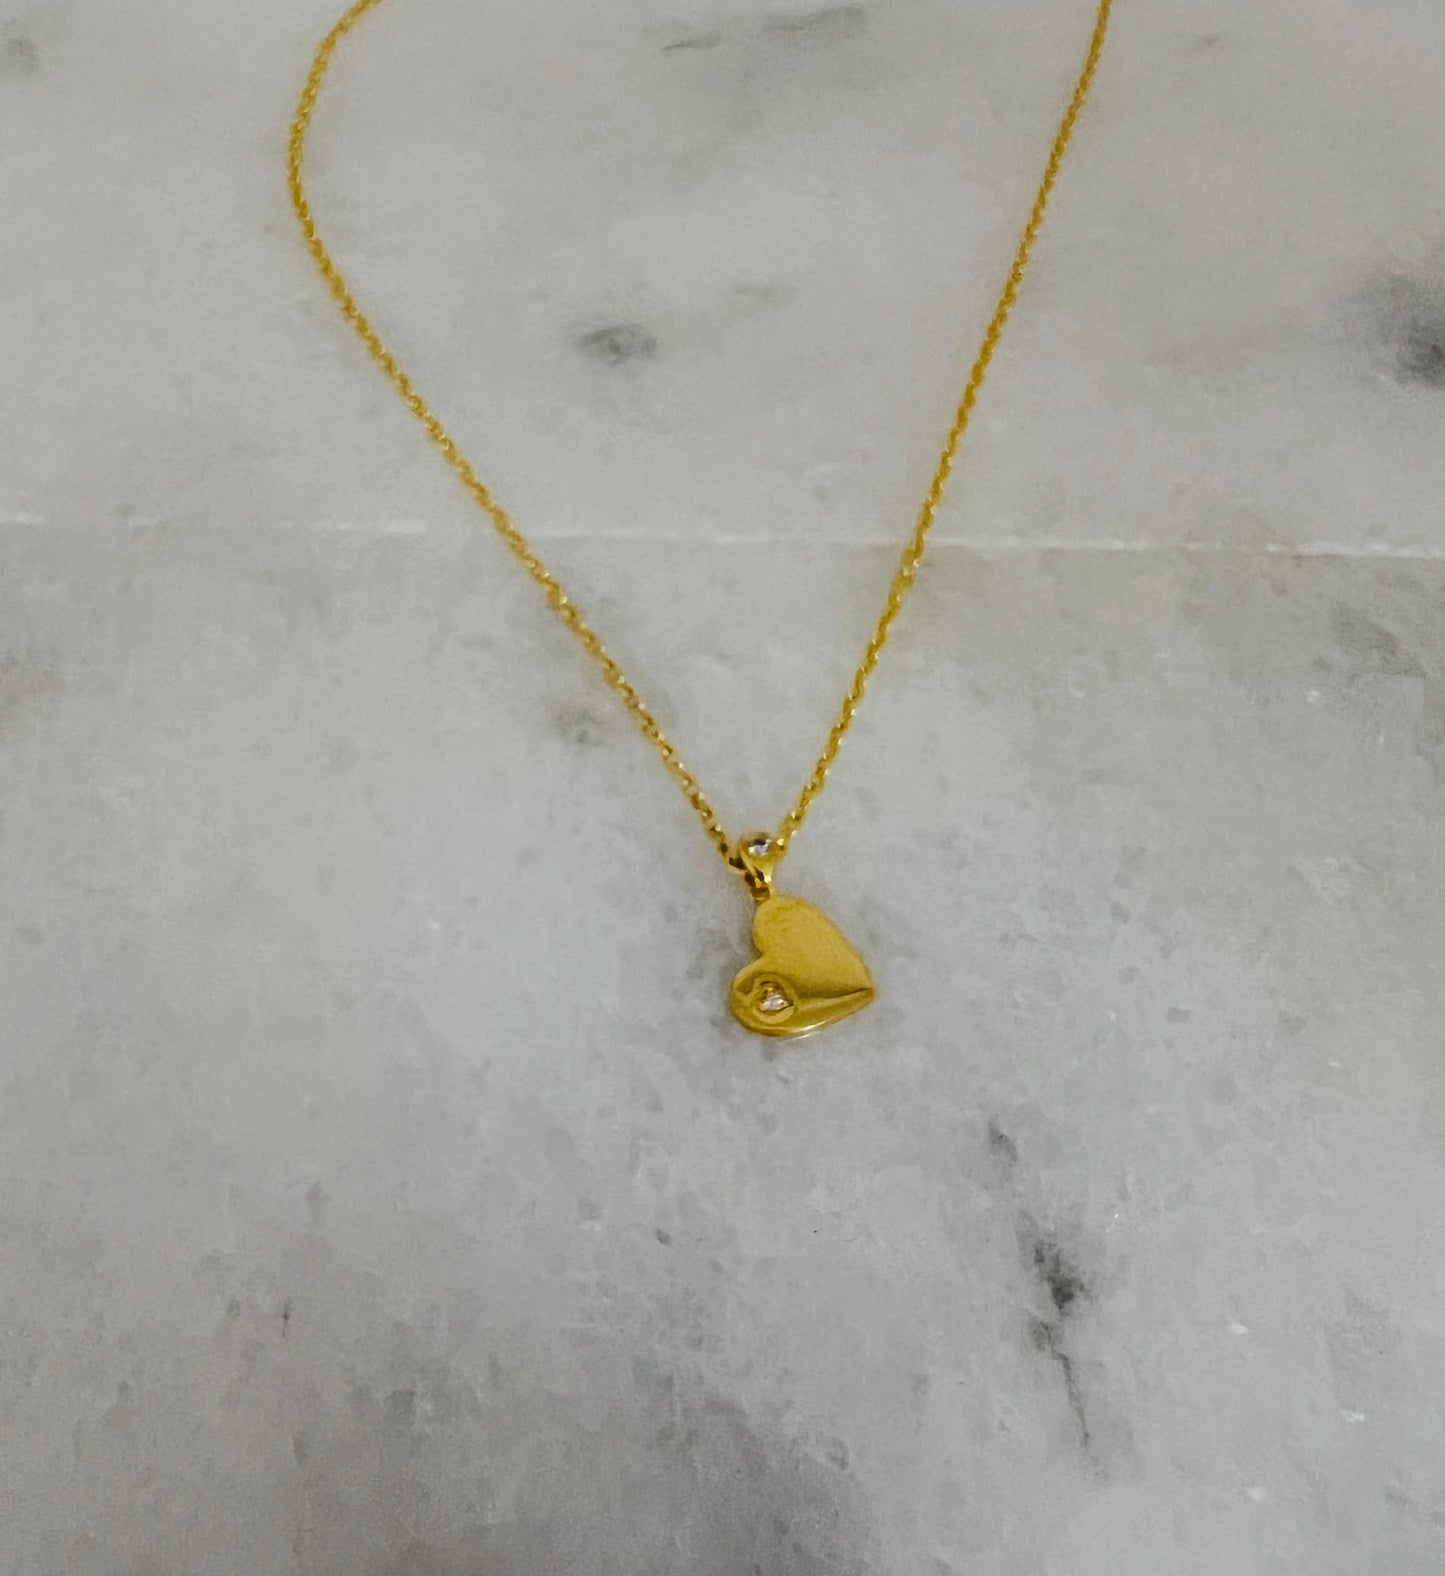 21k Gold Heart necklace